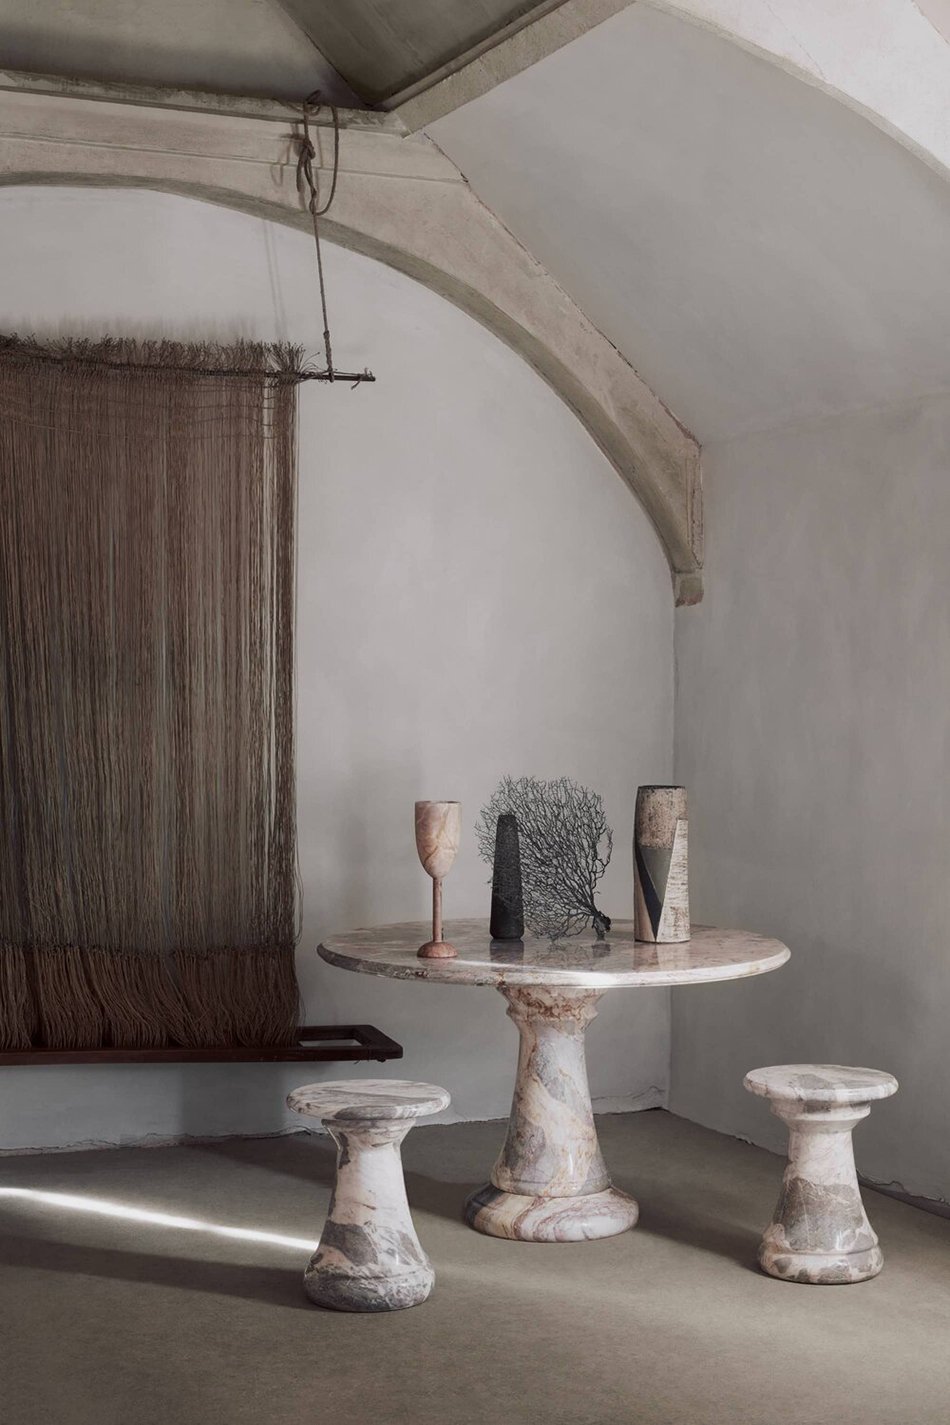 A minimal rustic room painted in  'Slow' off-white limewash paint designed by House of Grey for Bauwerk Colour.